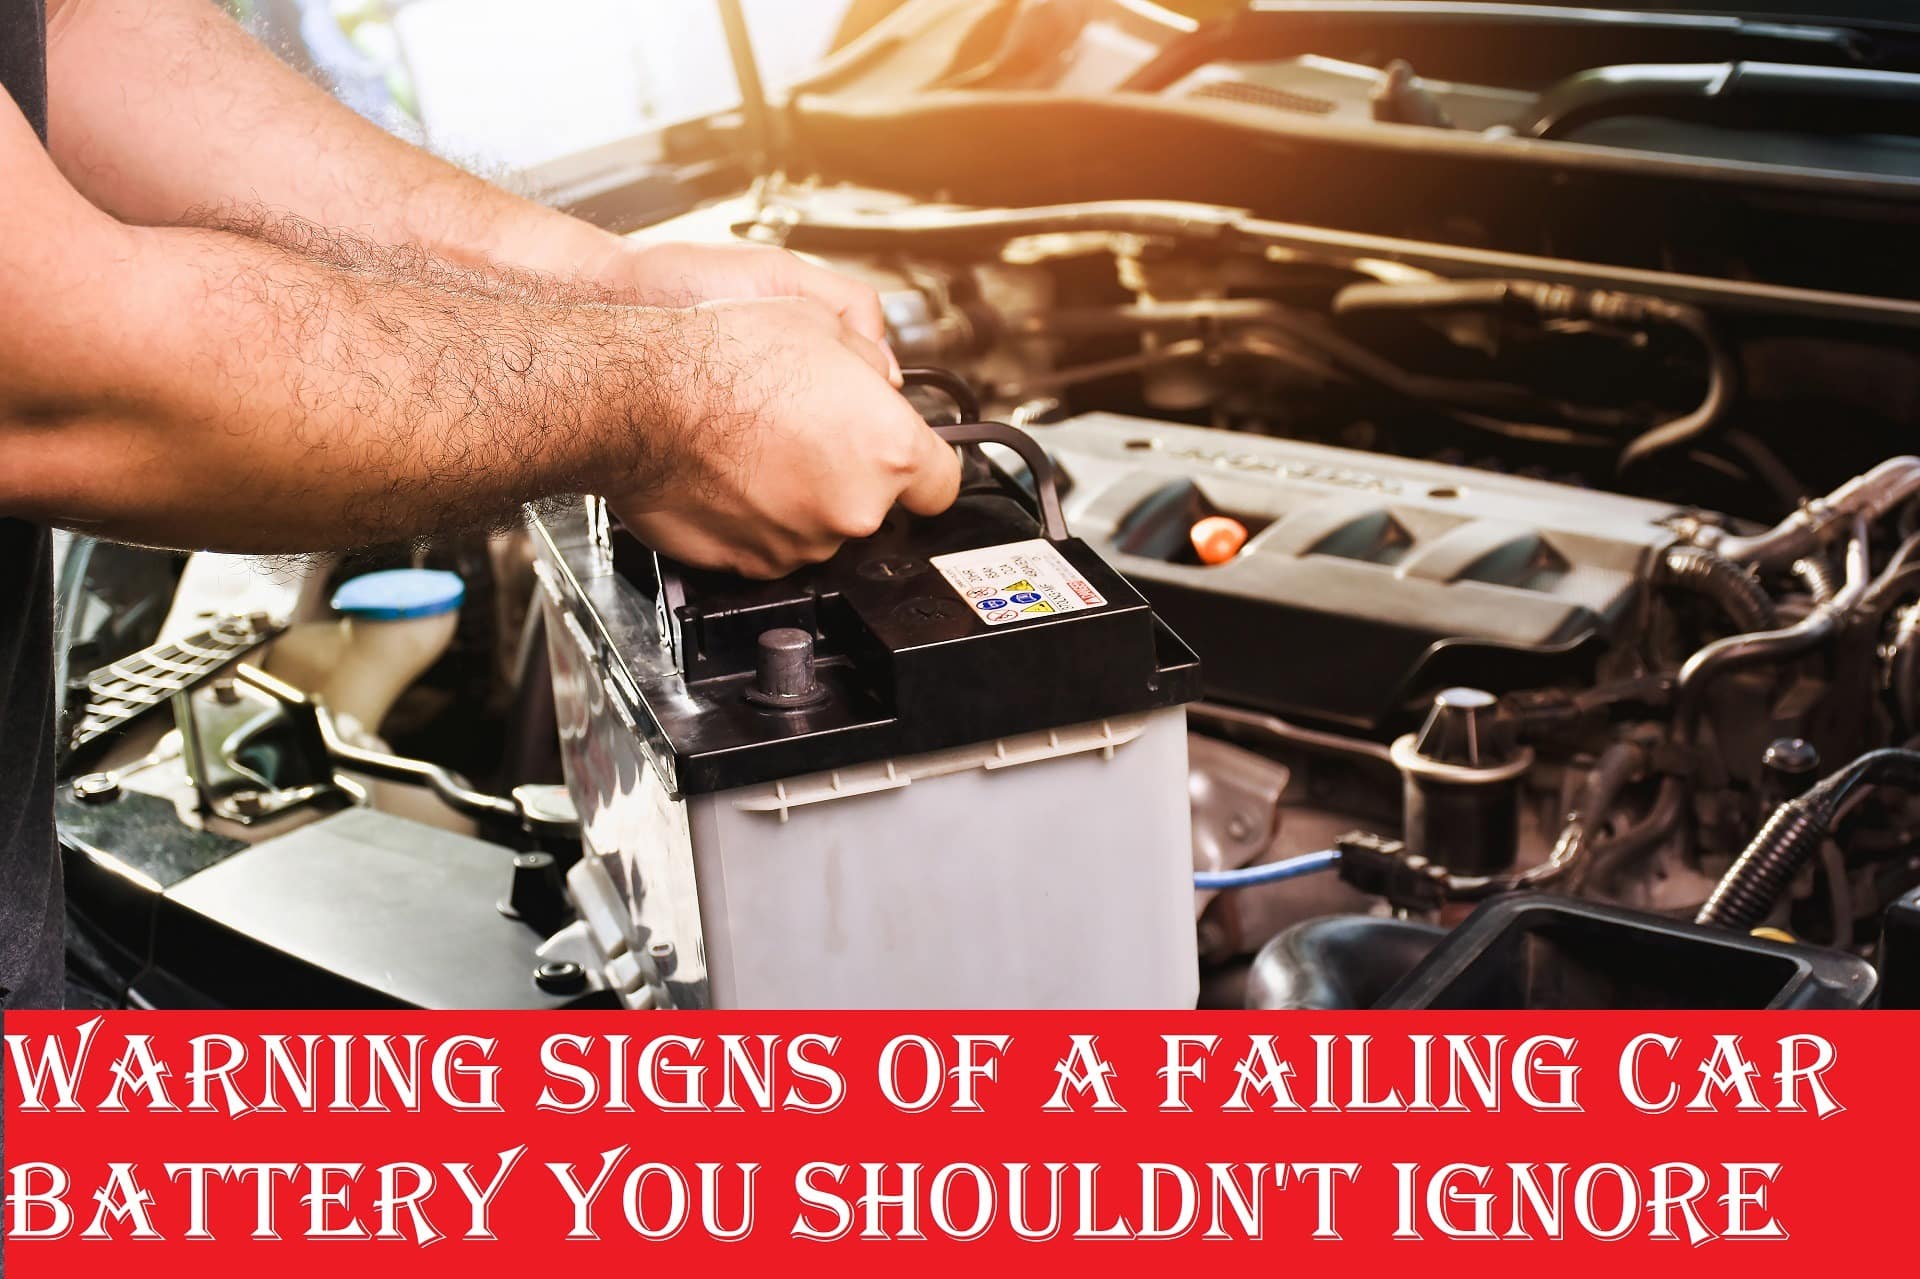 Warning Signs Of A Failing Car Battery You Shouldn't Ignore